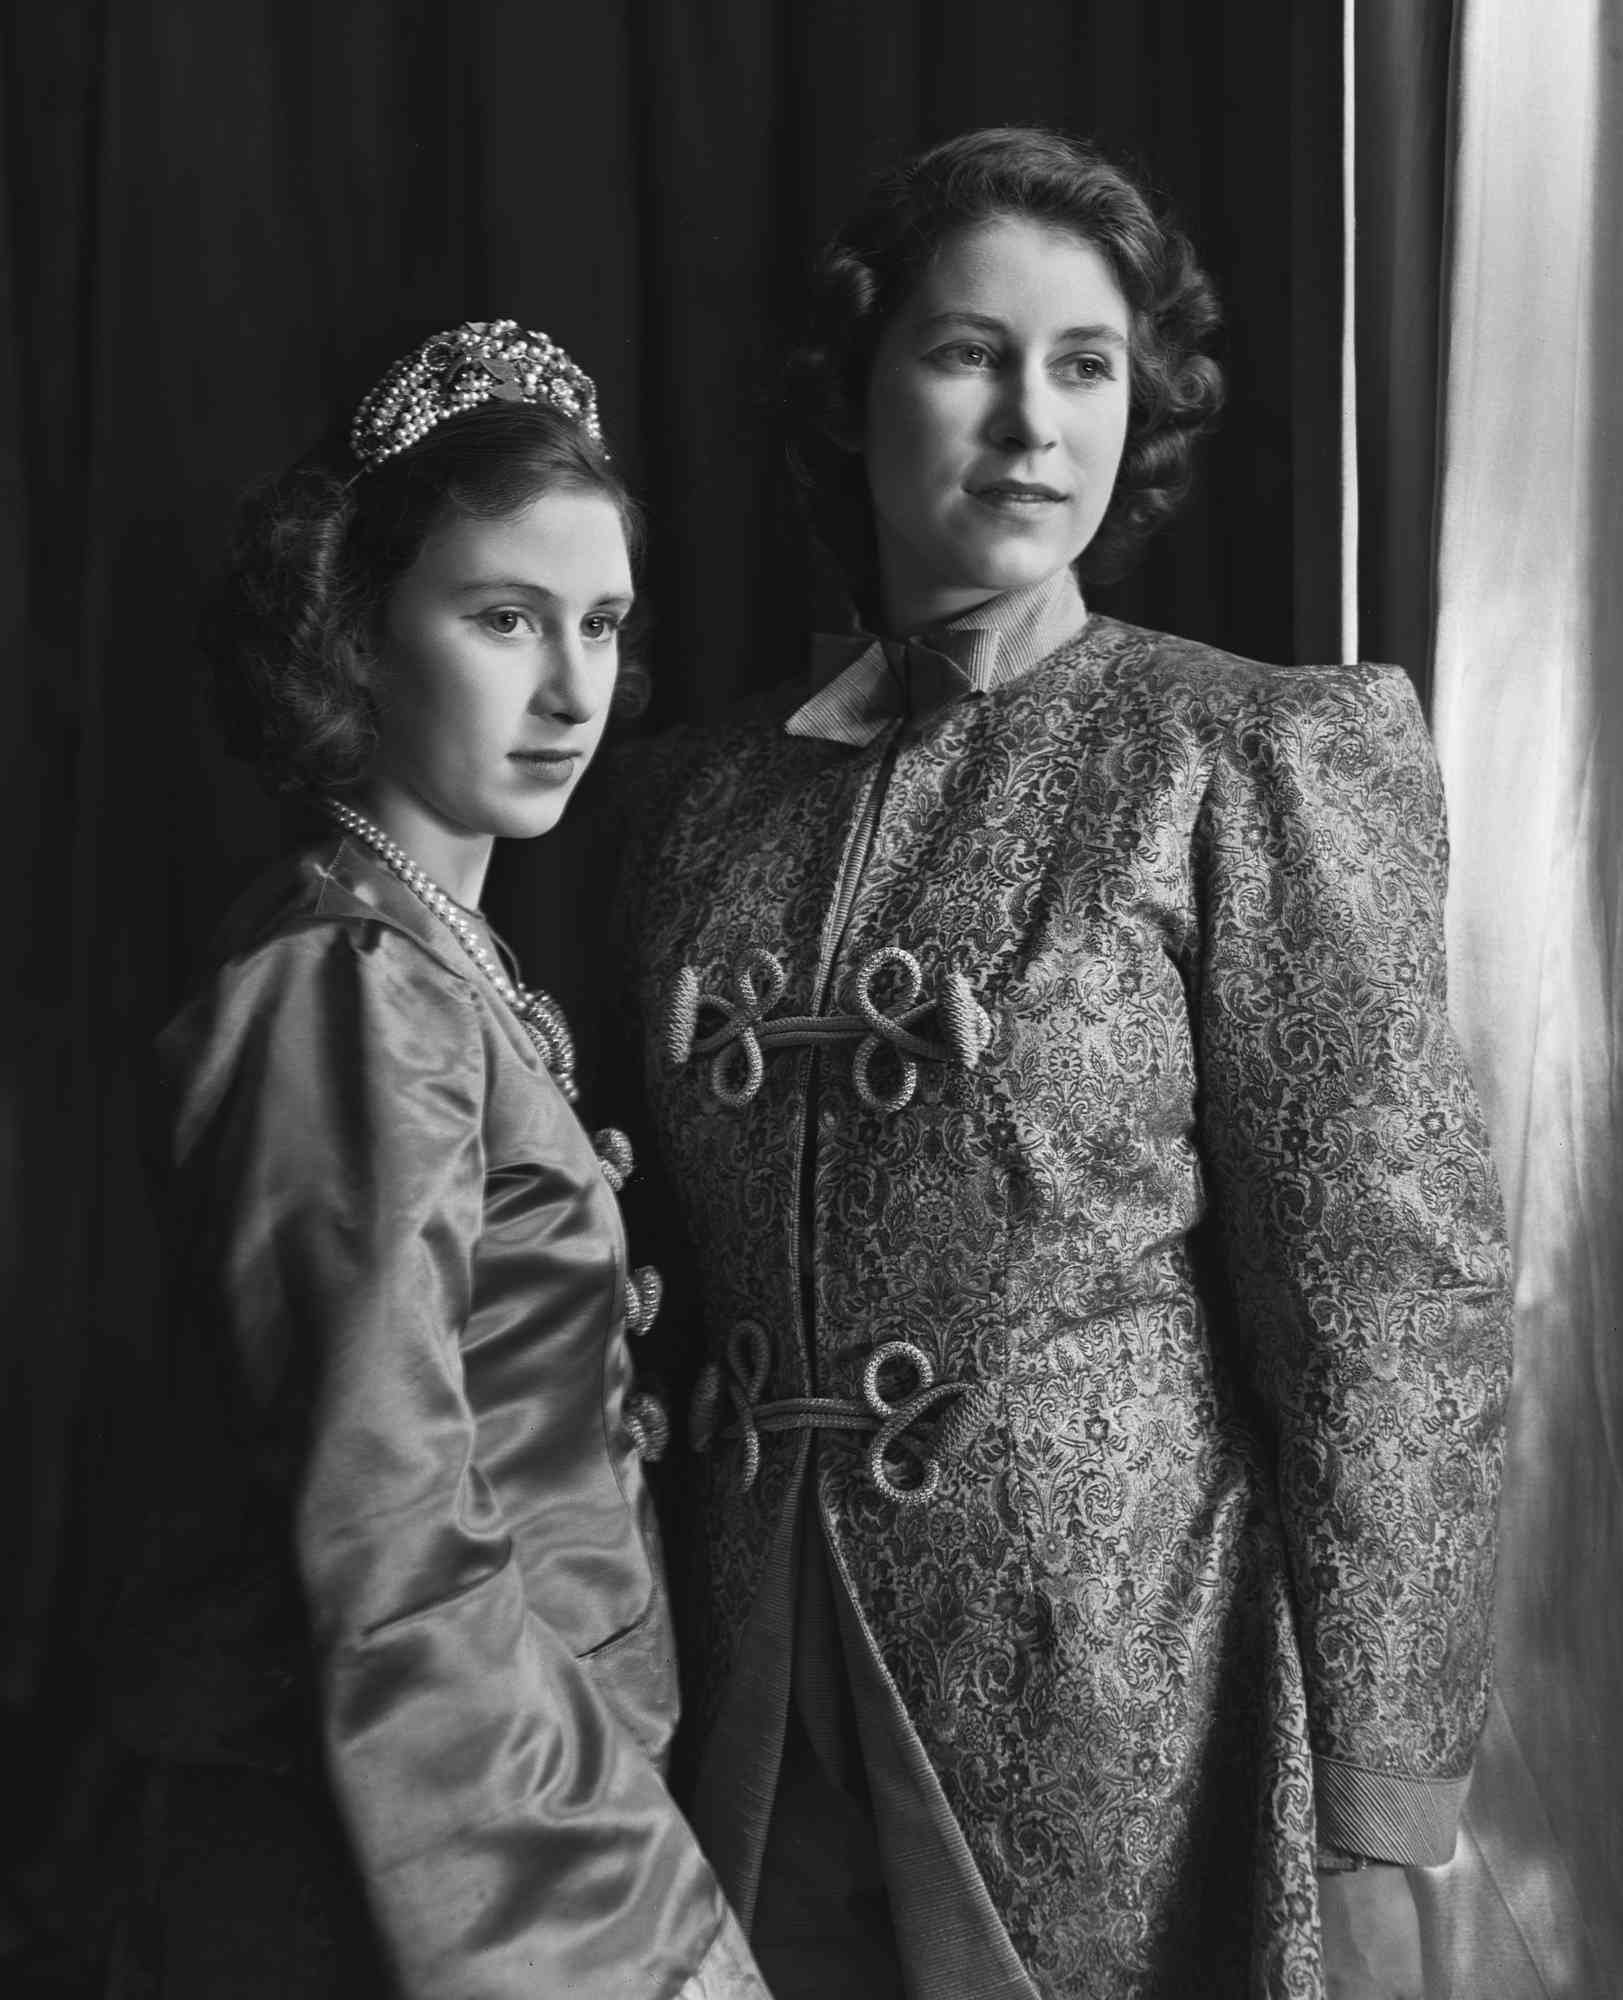 Princess Elizabeth (Queen Elizabeth II) and Princess Margaret (1930-2002), both in costume, pictured ahead of a royal pantomime production of 'Aladdin' at Windsor Castle, Berkshire, Great Britain, 15 December 1943